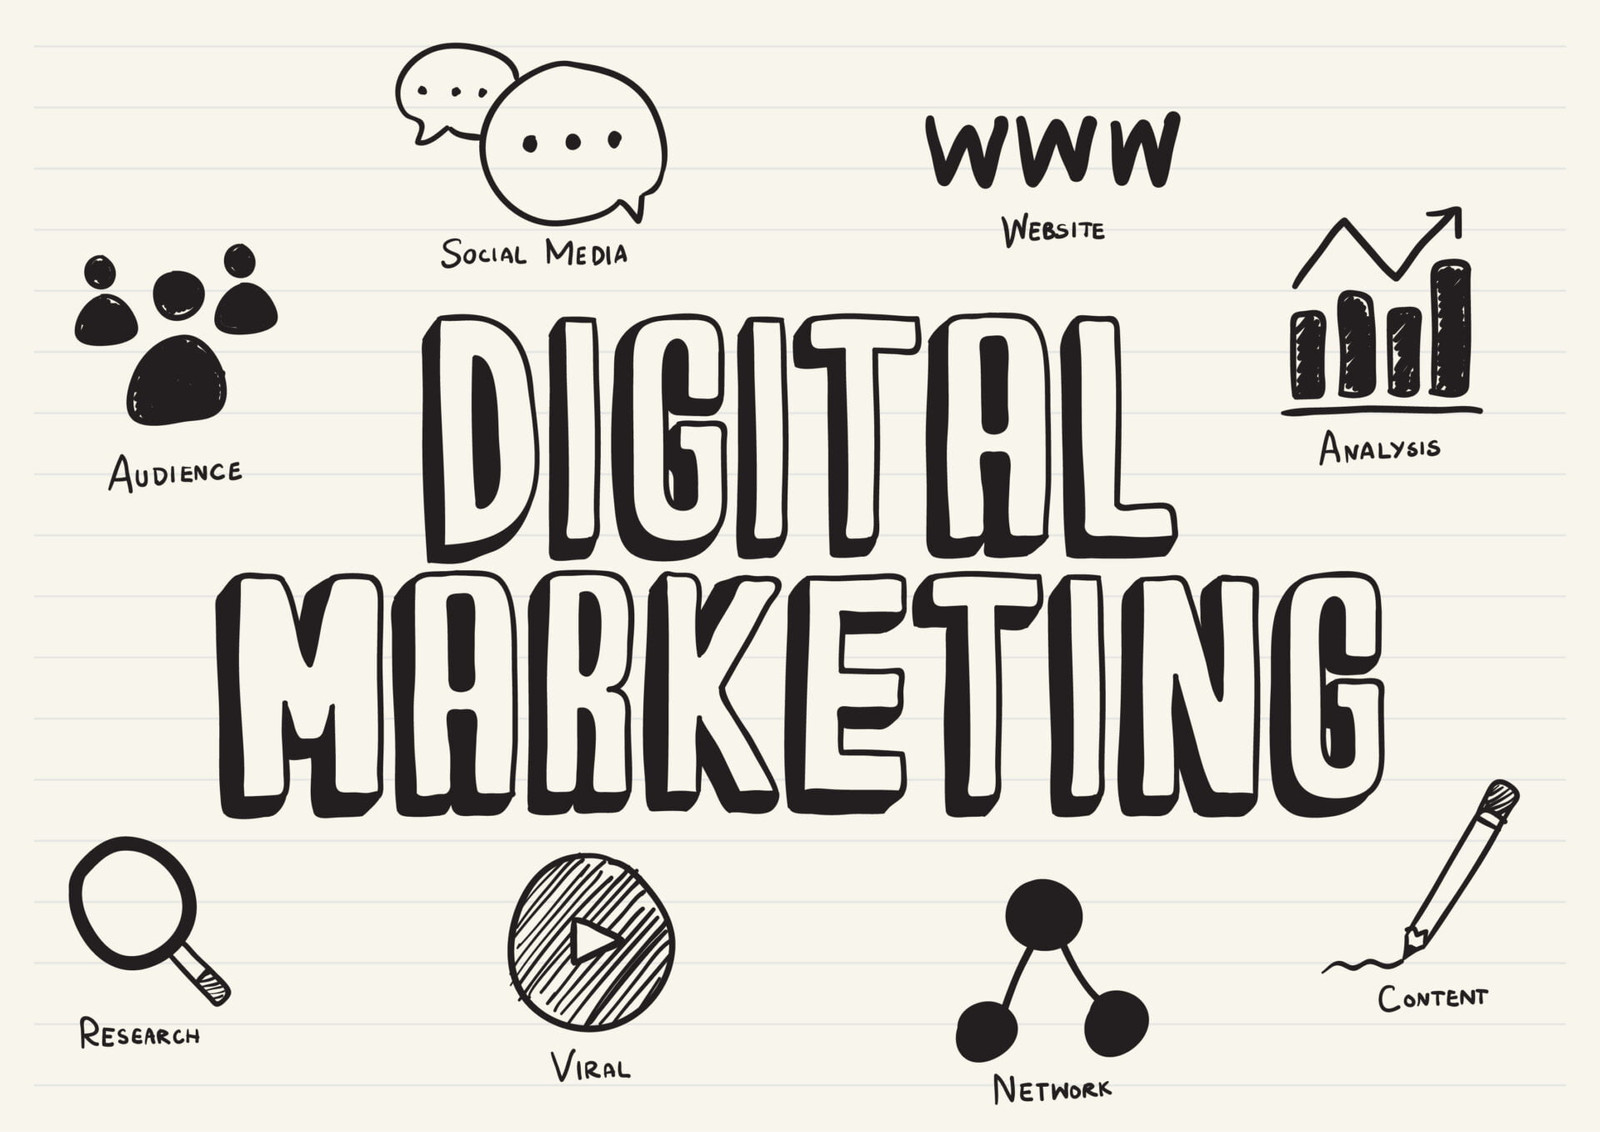 HOW TO CHOOSE A DIGITAL MARKETING AGENCY IN INDIA?